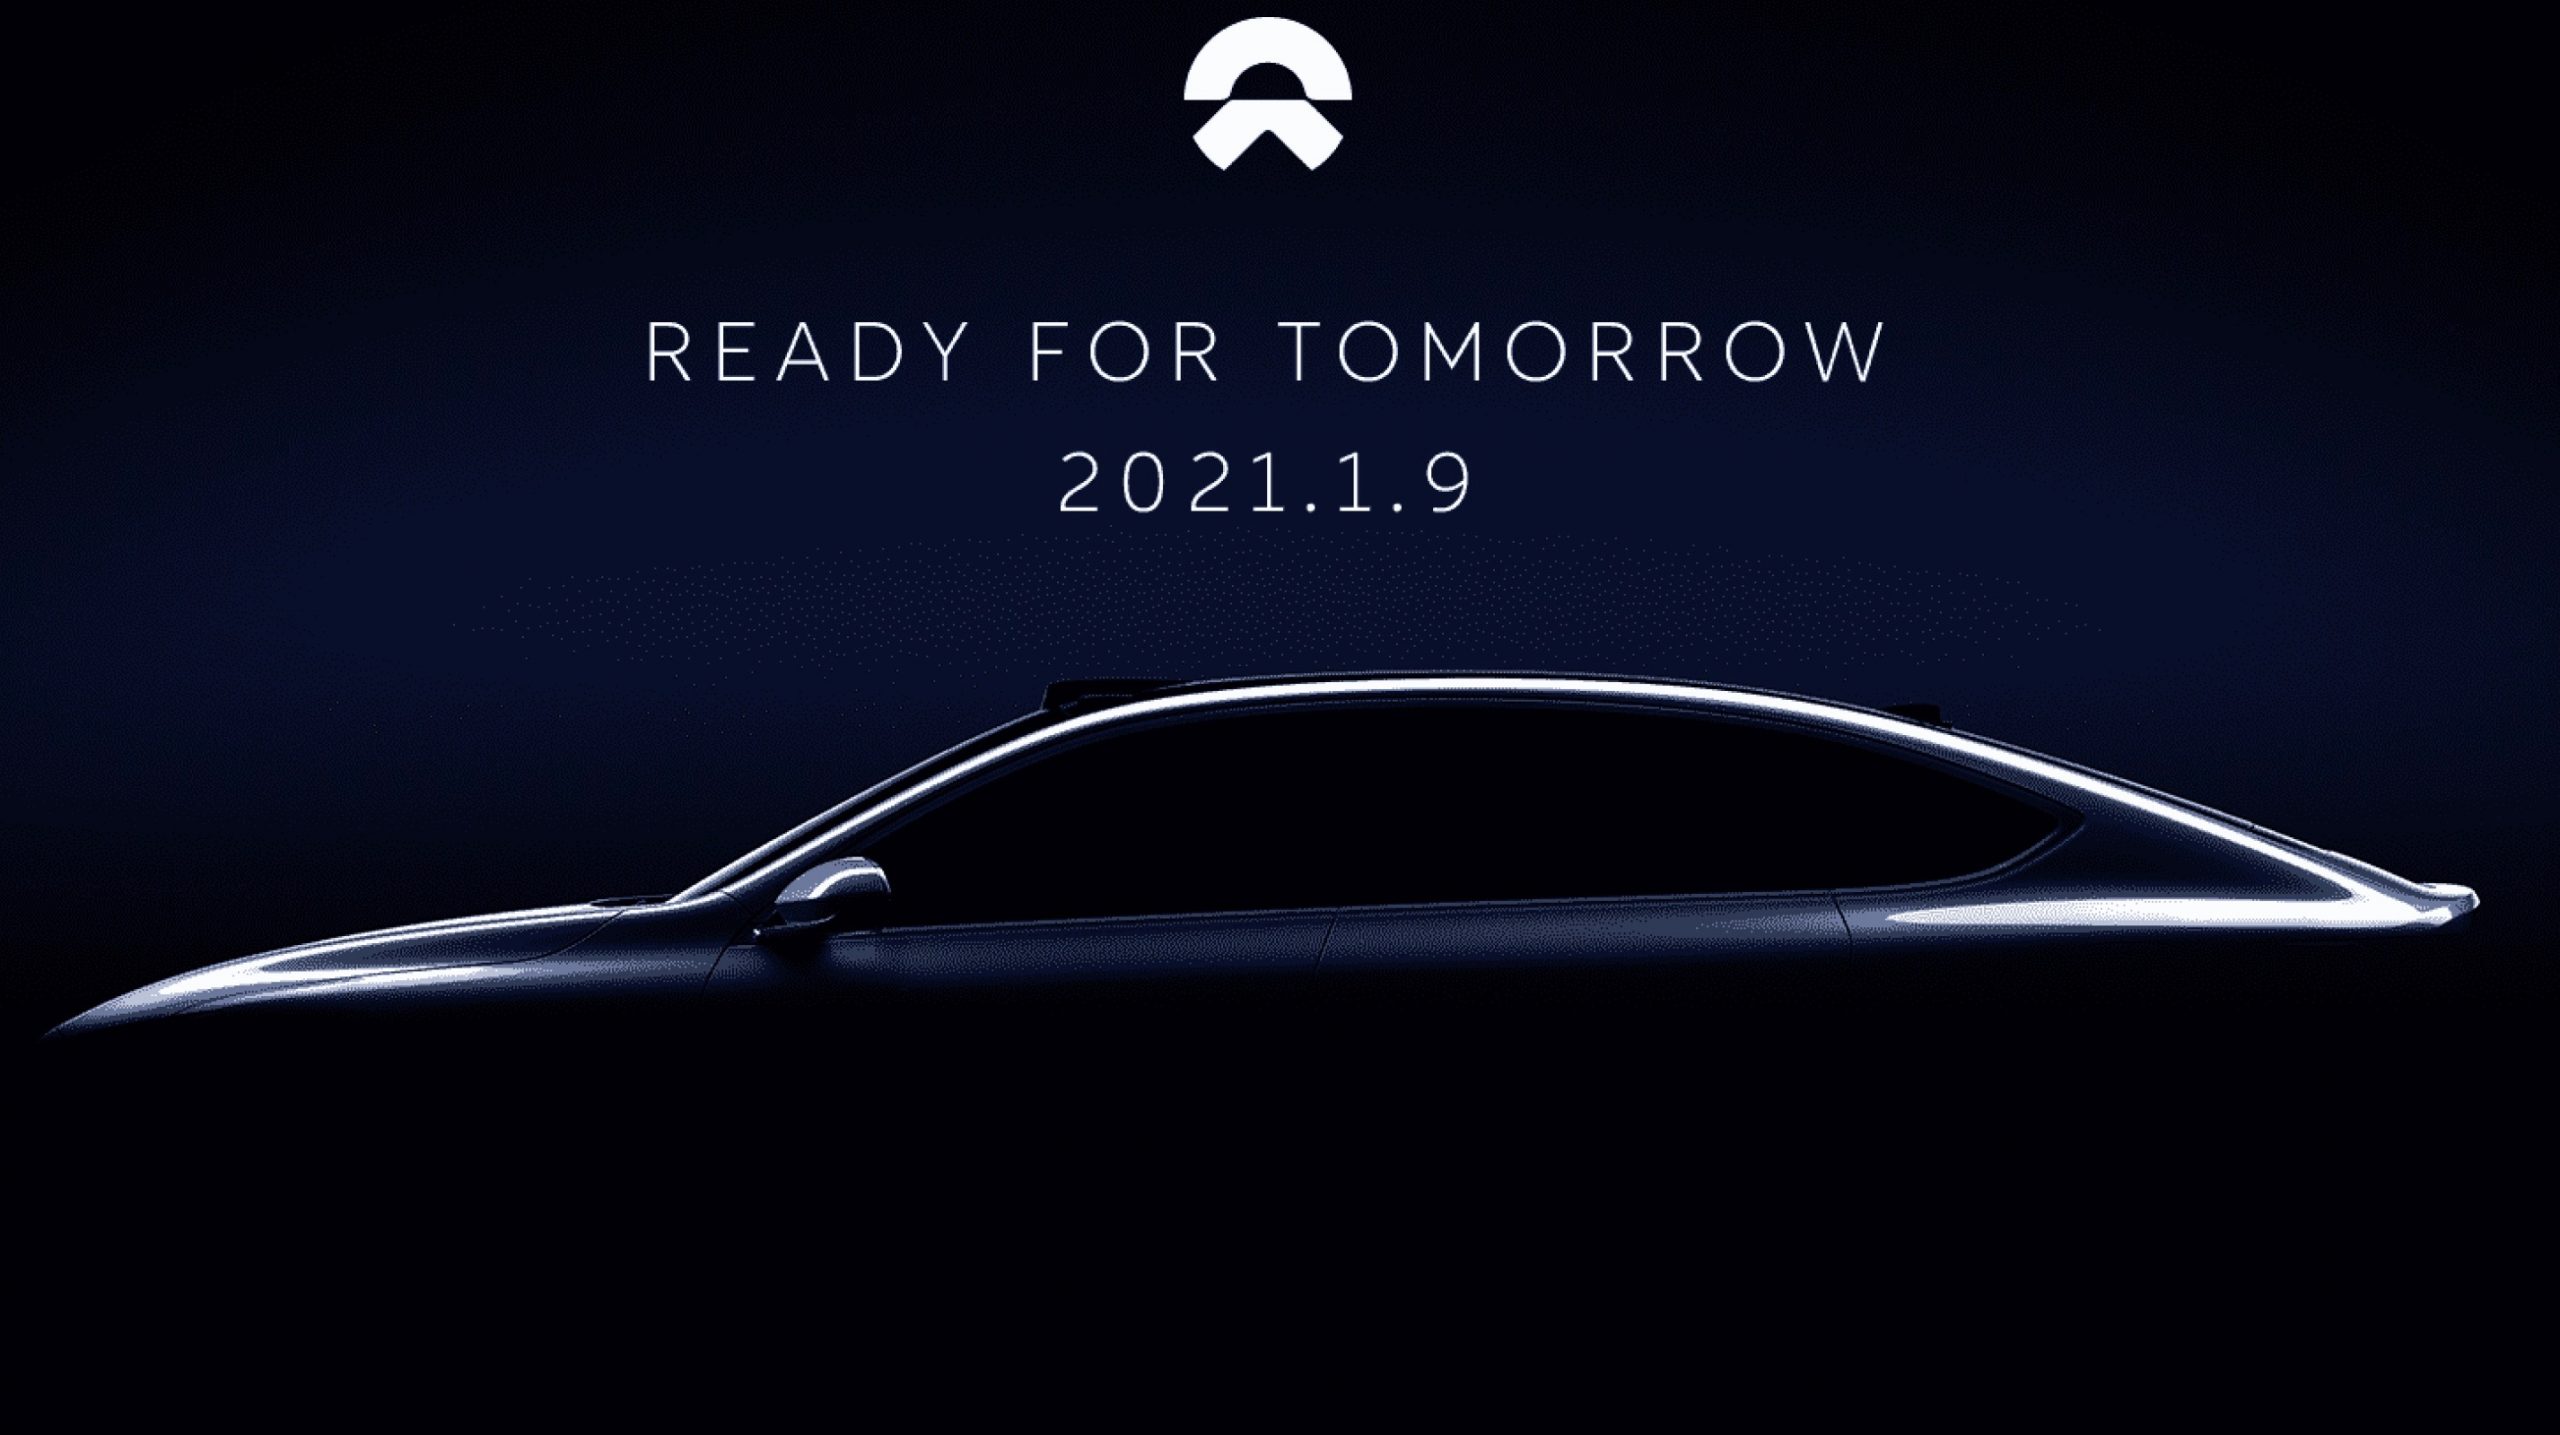 NIO previews first flagship sedan, to feature 150kWh battery